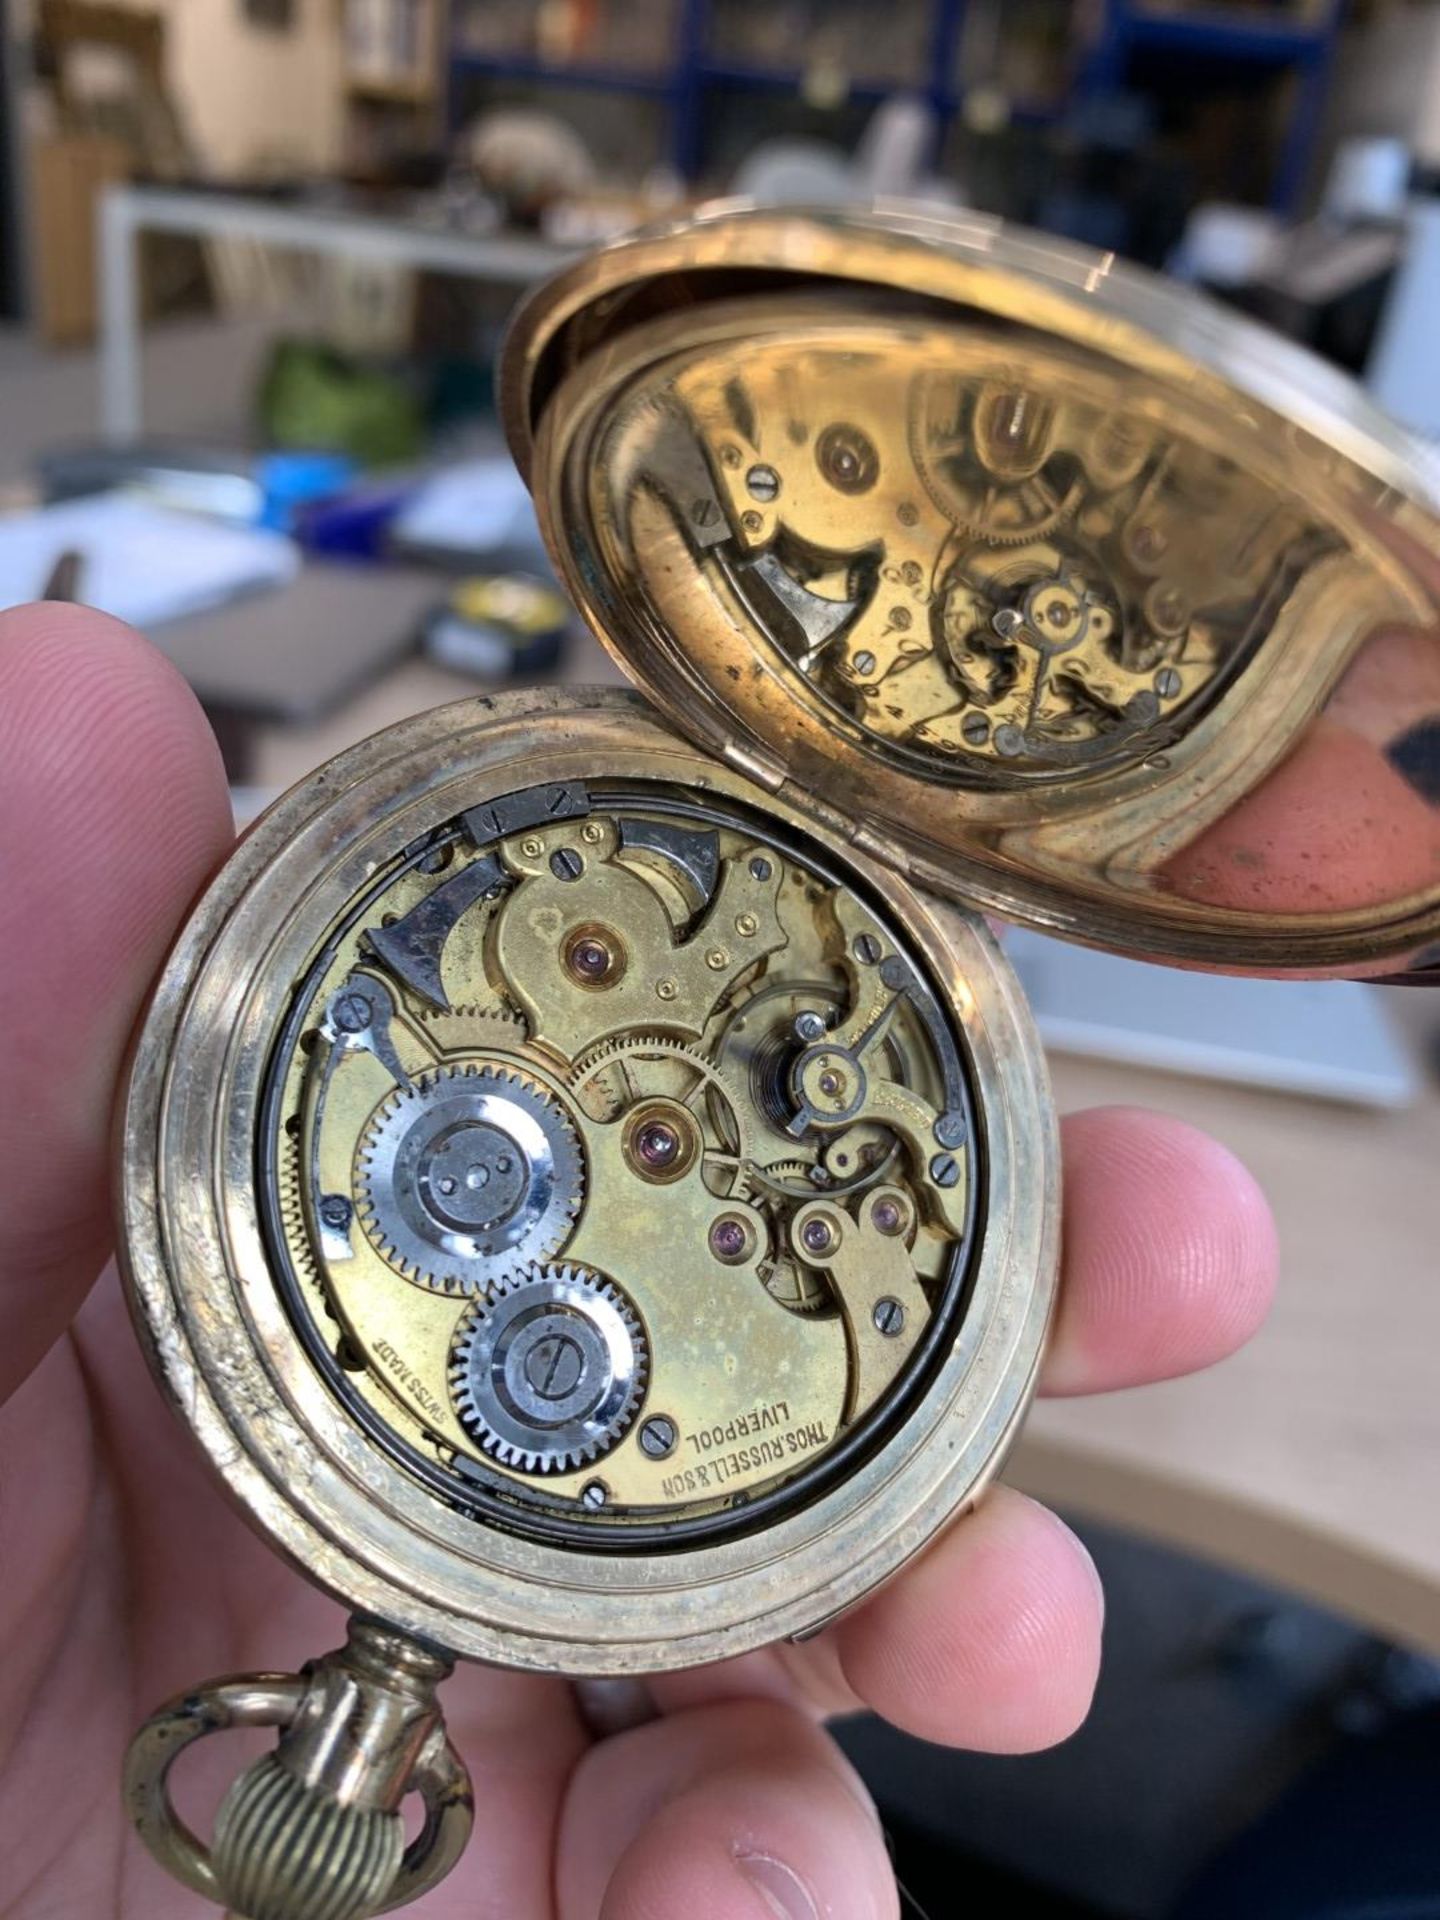 A Thomas Russell Quarter Repeater Hunter Pocket watch - Image 2 of 4